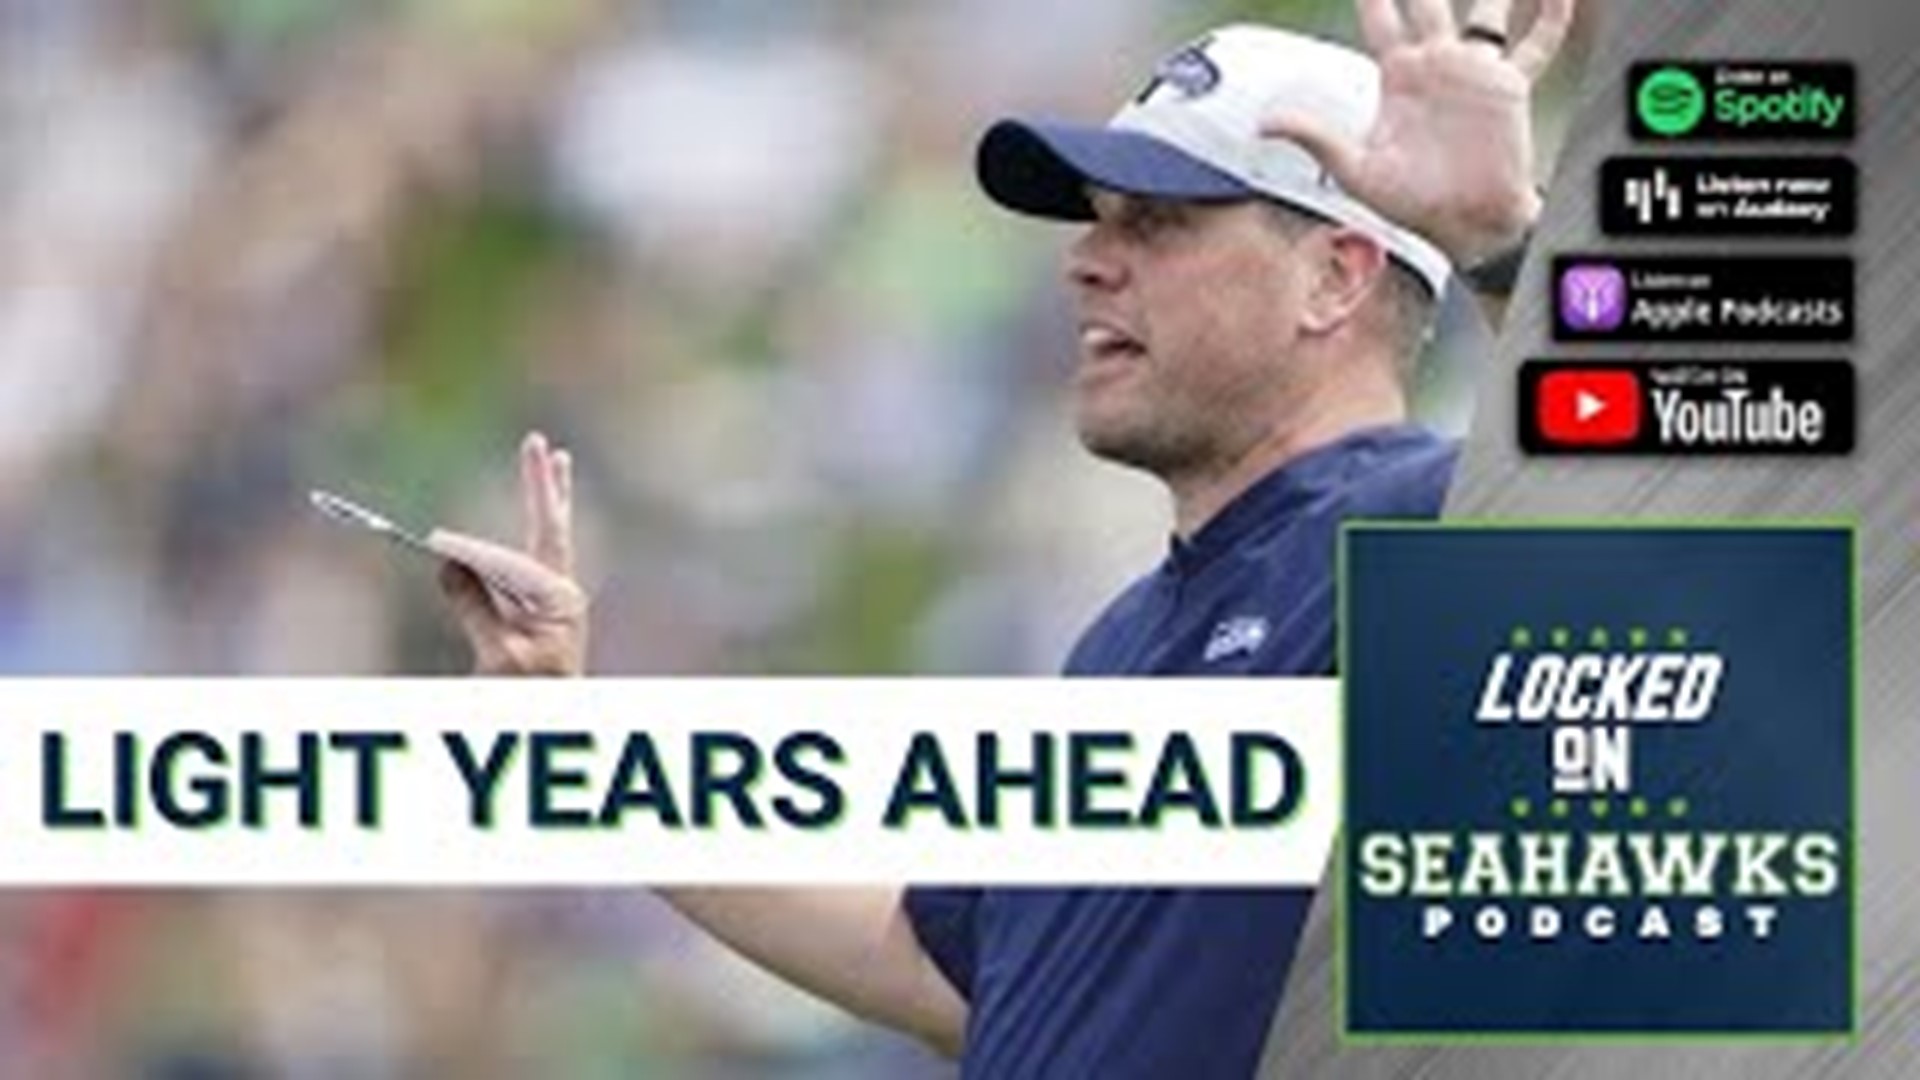 Press conference takeaways: while Offensive Coordinator Shane Waldron faces a quarterback conundrum without Russell Wilson, he's pleased with the team's progress.